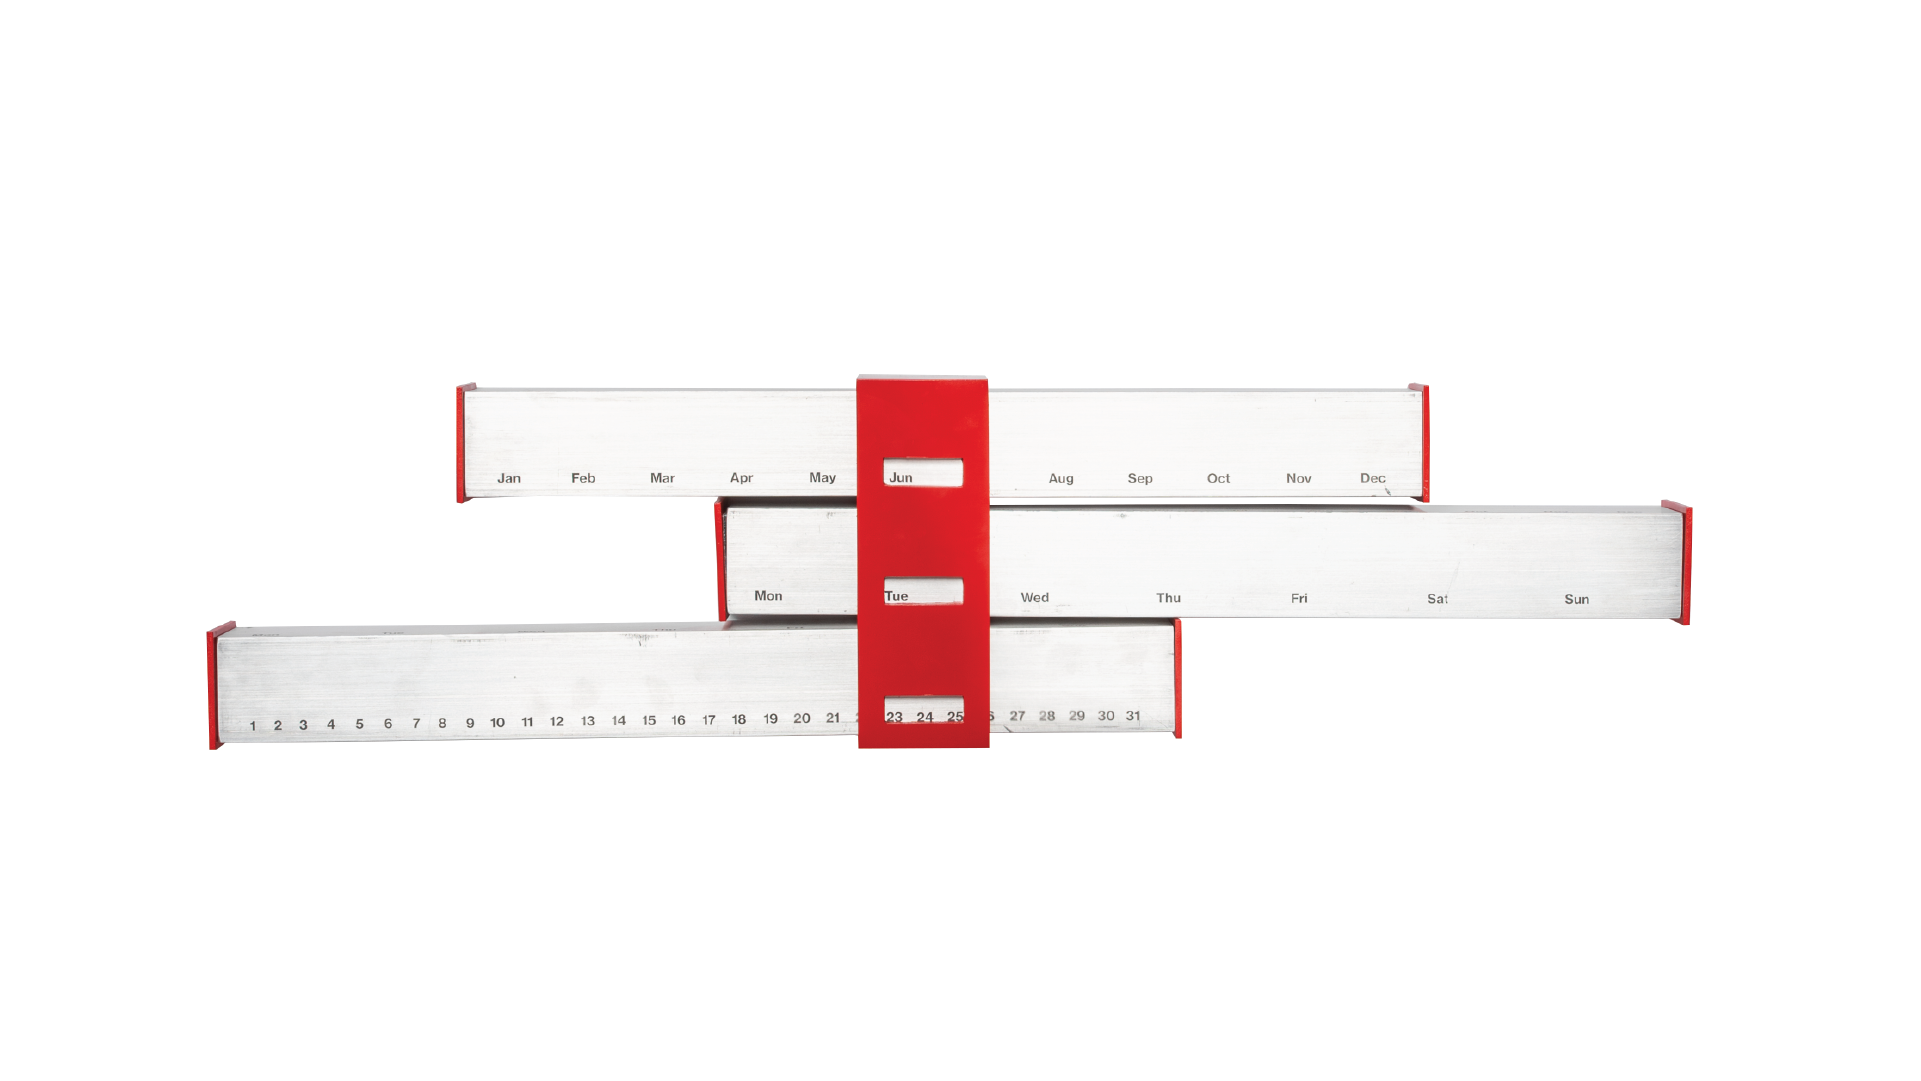 Calendar made with 3 aluminium tubes where each of them has marks on month, day of the week and day. The three tubes are arranged together by a red plastic support on the middle that allows the tubes to slide horizontally. The red support is fixed on the wall and it has windows to isolate the day of the calendar.